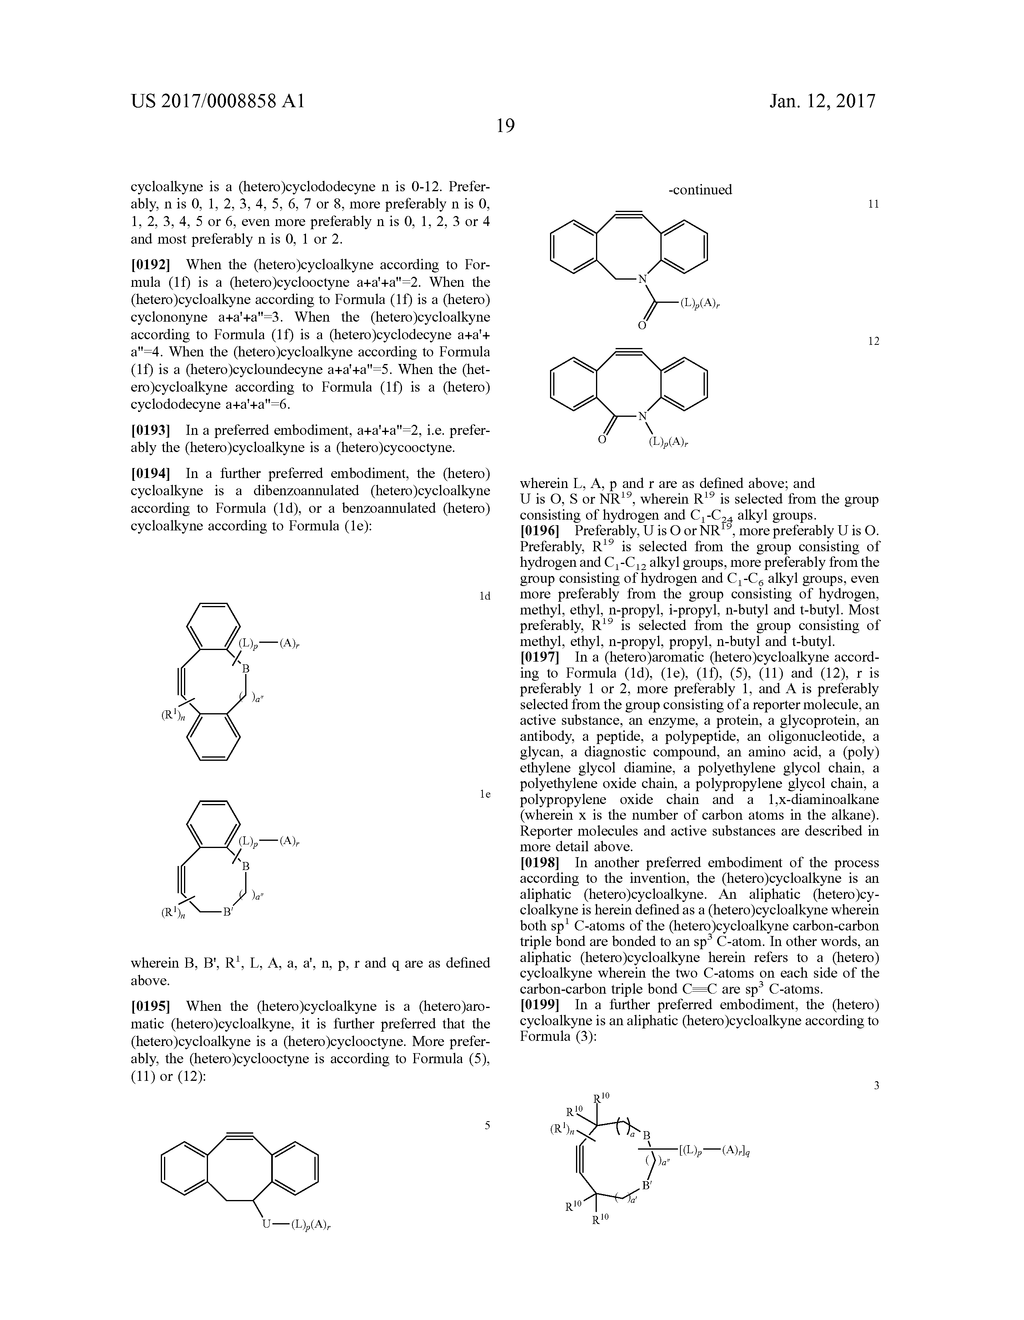 PROCESS FOR THE CYCLOADDITION OF A HALOGENATED 1,3-DIPOLE COMPOUND WITH A     (HETERO)CYCLOALKYNE - diagram, schematic, and image 29